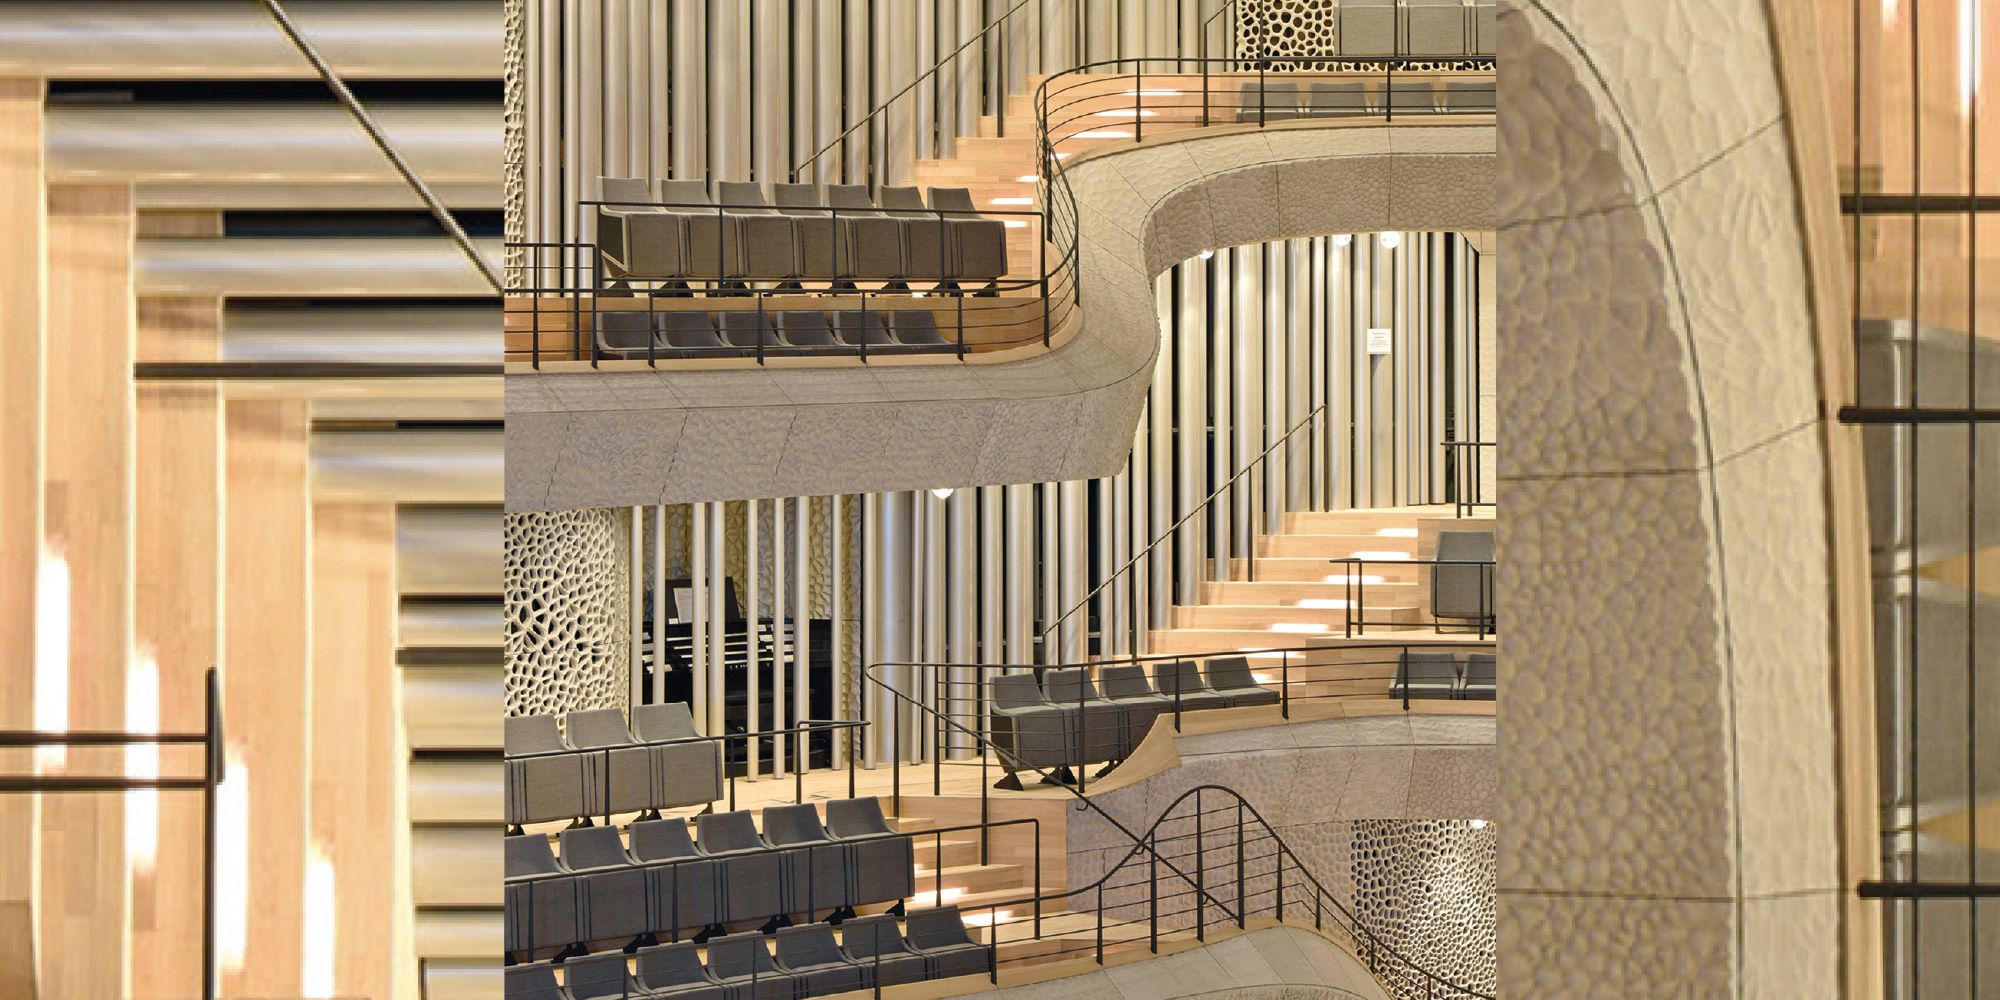 Stairs, Pipe organ, Handrail, Architecture, Baluster, Organ pipe, Building, Technology, Material property, Organ, 